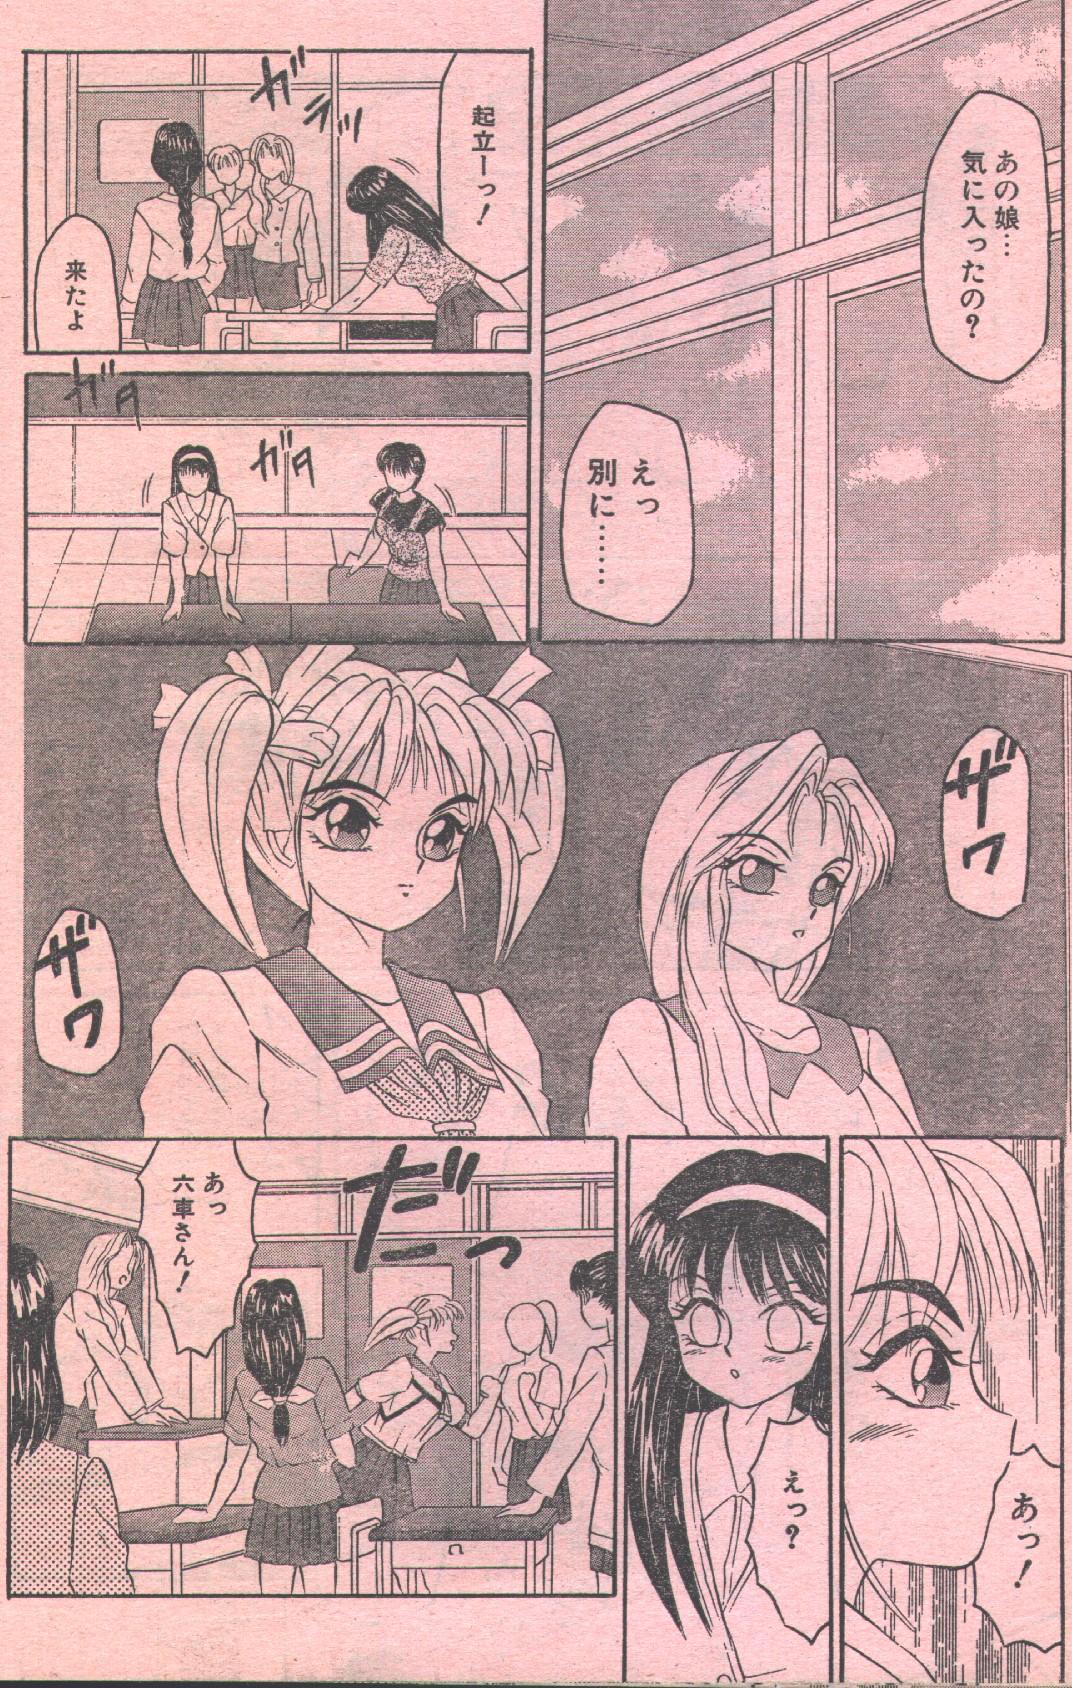 Cotton Comic 1993-07-08 [Incomplete] page 17 full